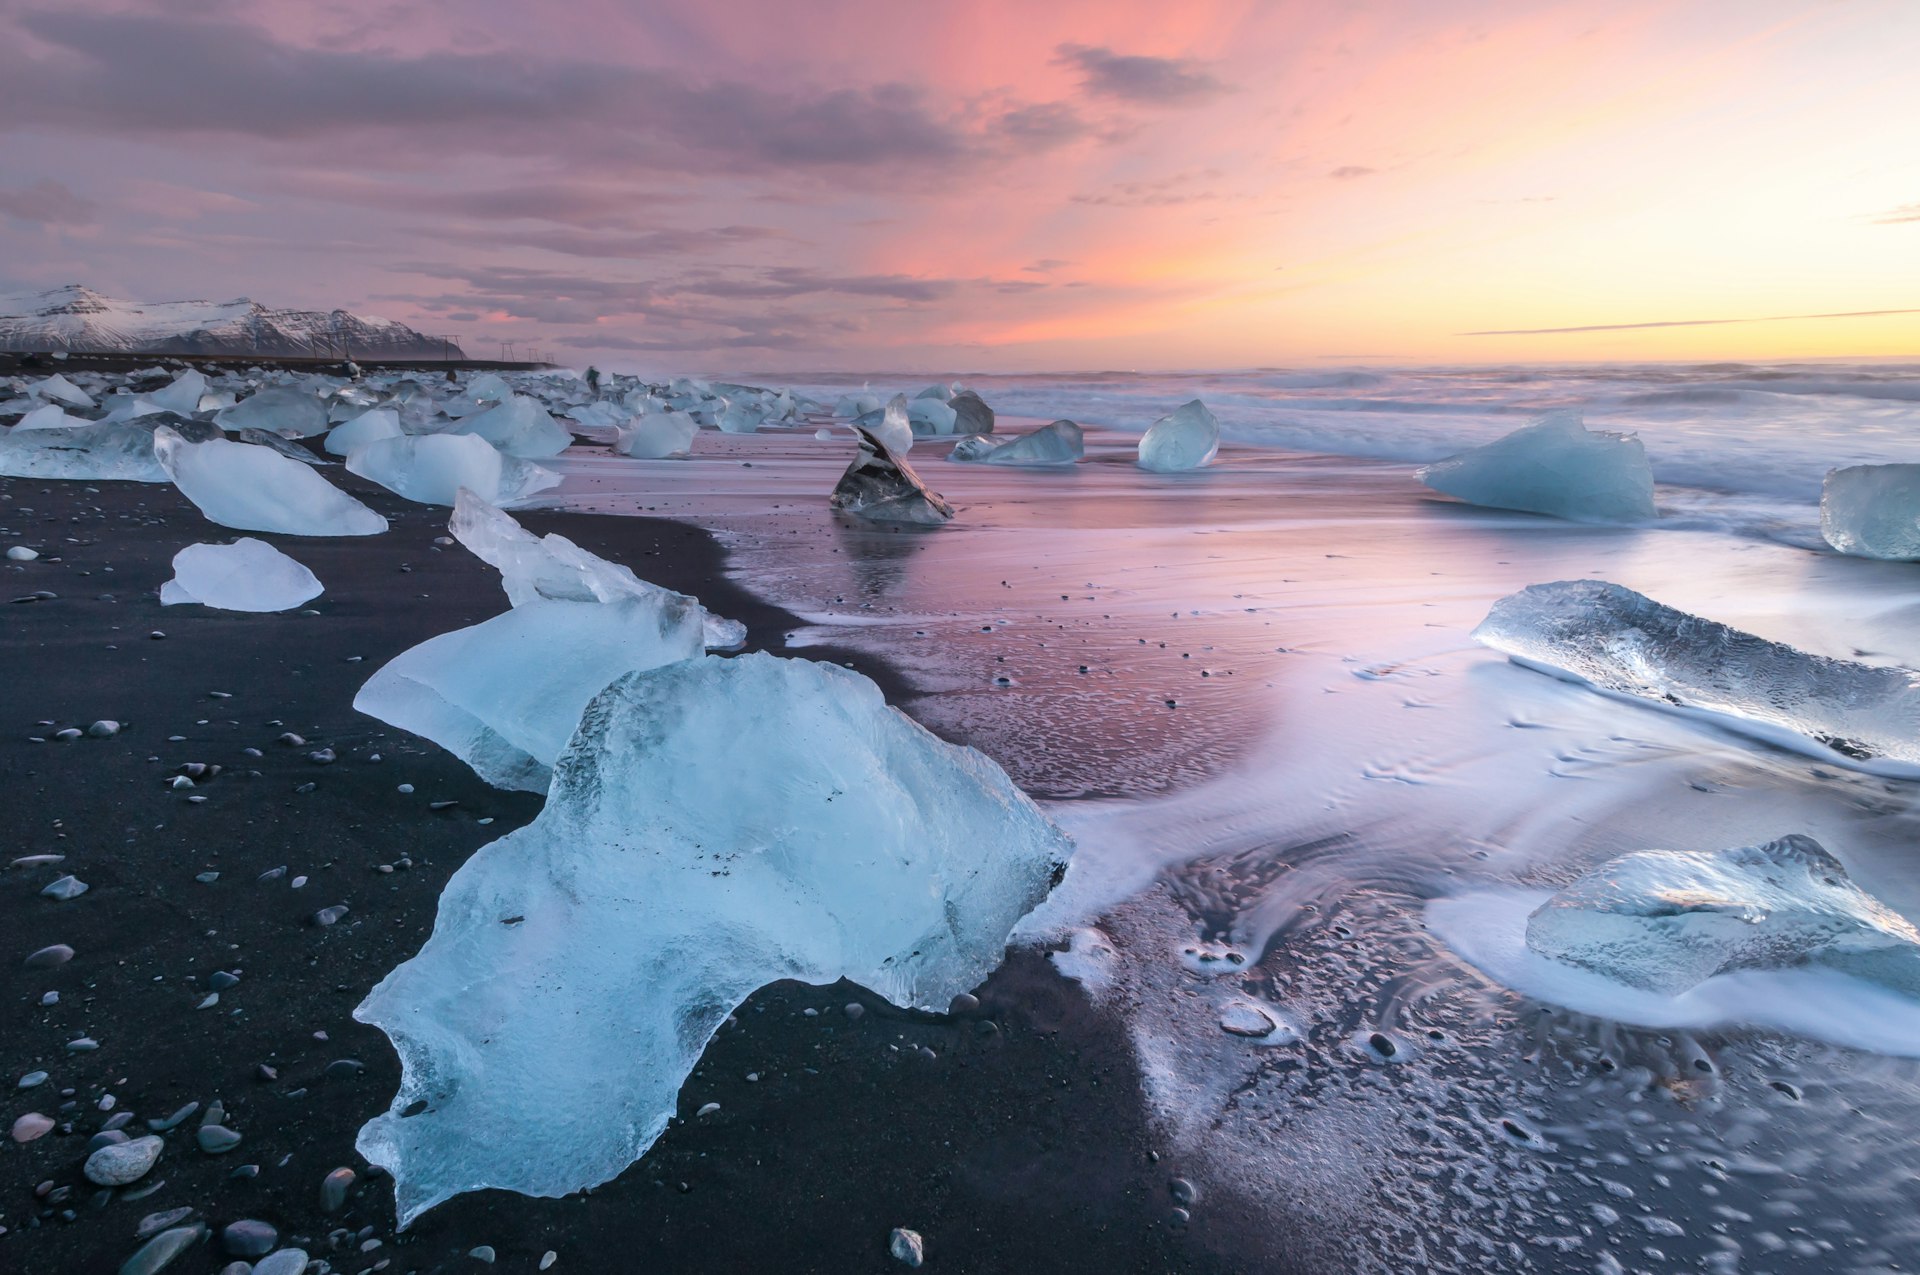 Chunks of ice and icebergs that have washed up on a beach in South Iceland